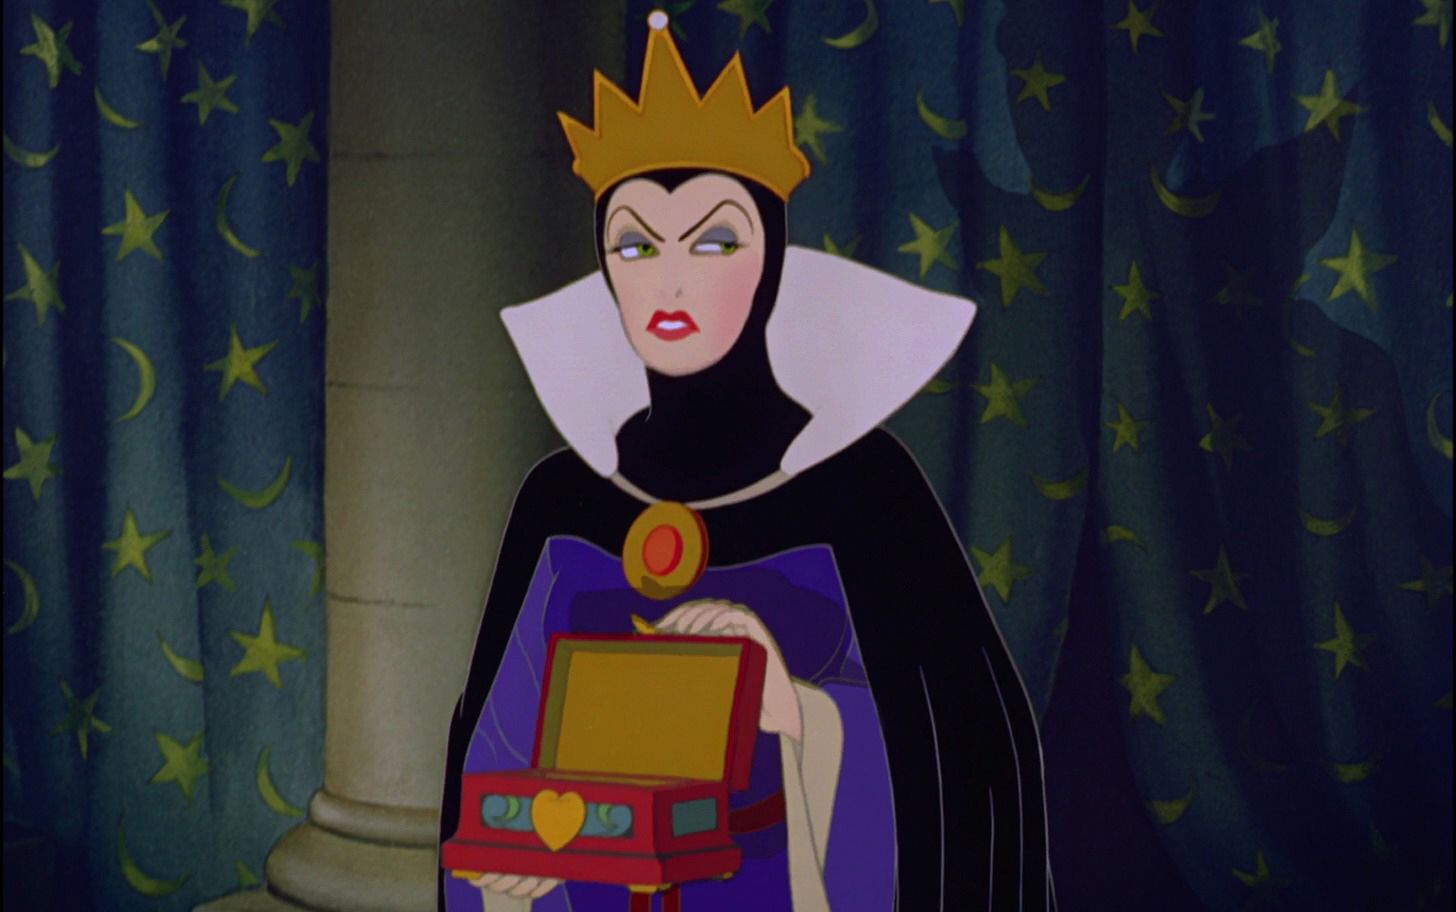 The Evil Queen from Disney's Snow White and the Seven Dwarves